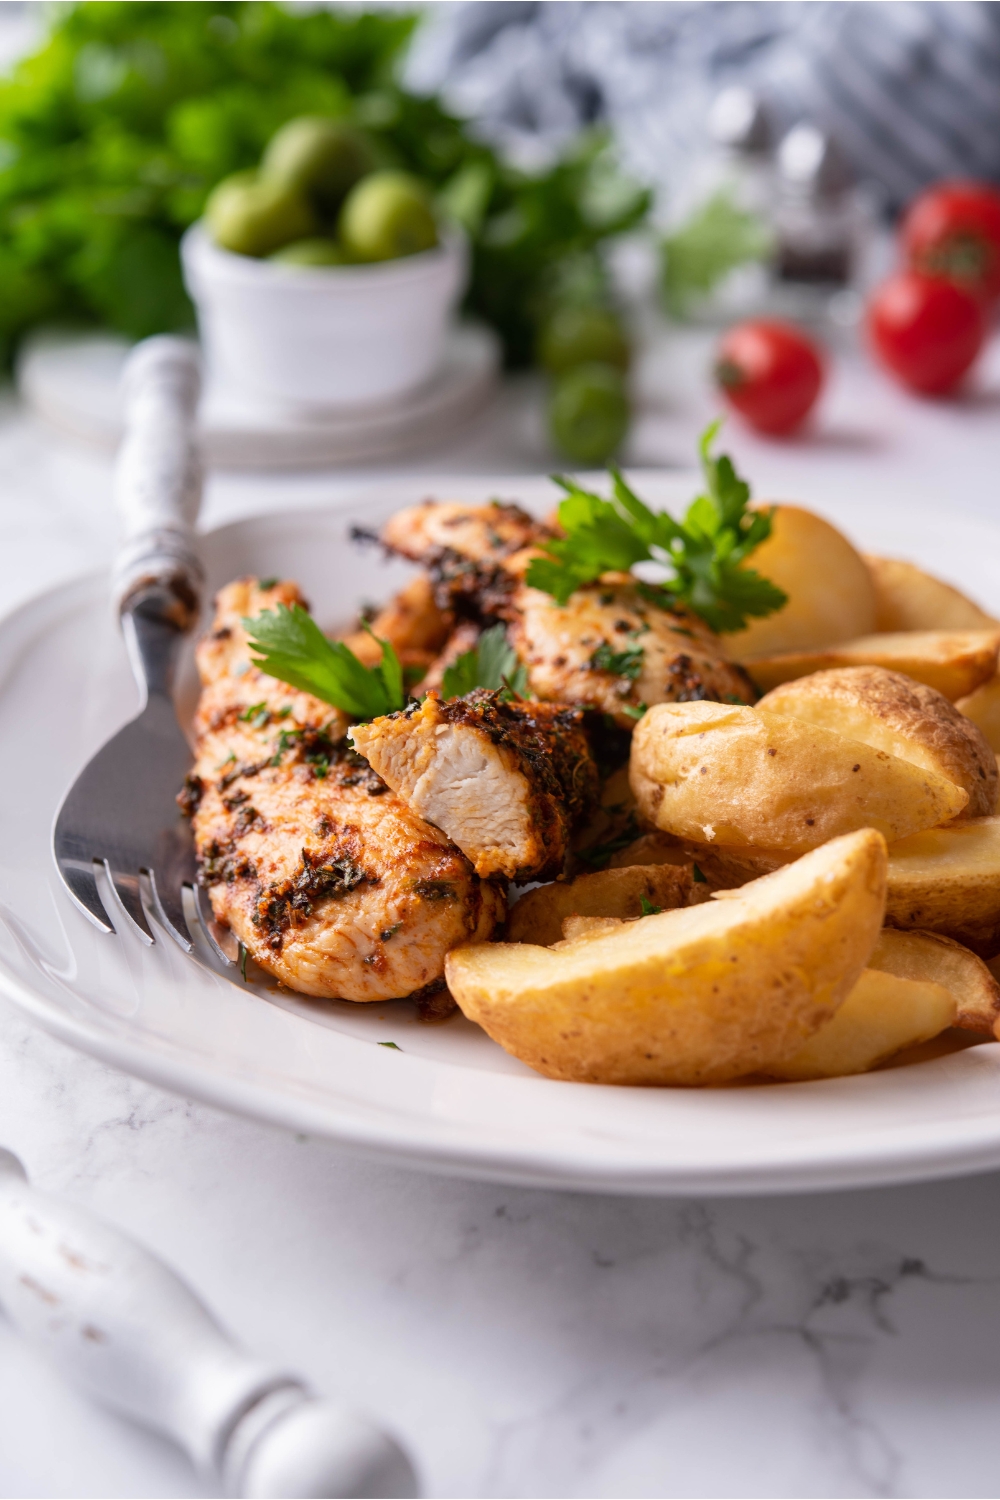 Baked chicken tenders on a white plate with potato wedges, a garnish of fresh herbs, and a fork on the plate.